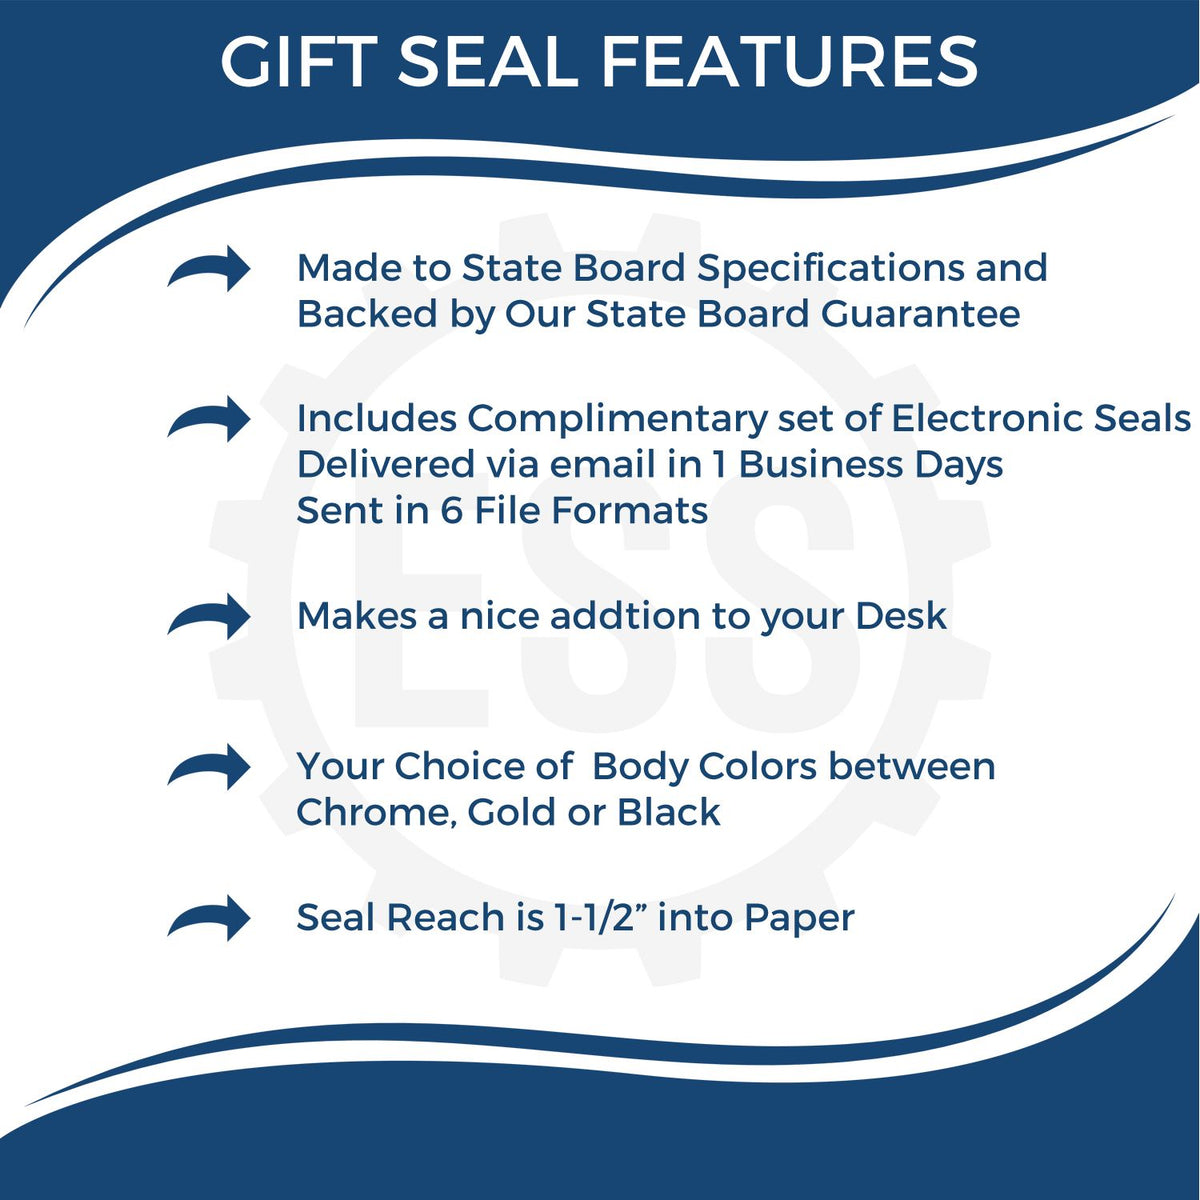 A picture of an infographic highlighting the selling points for the Gift Maine Geologist Seal